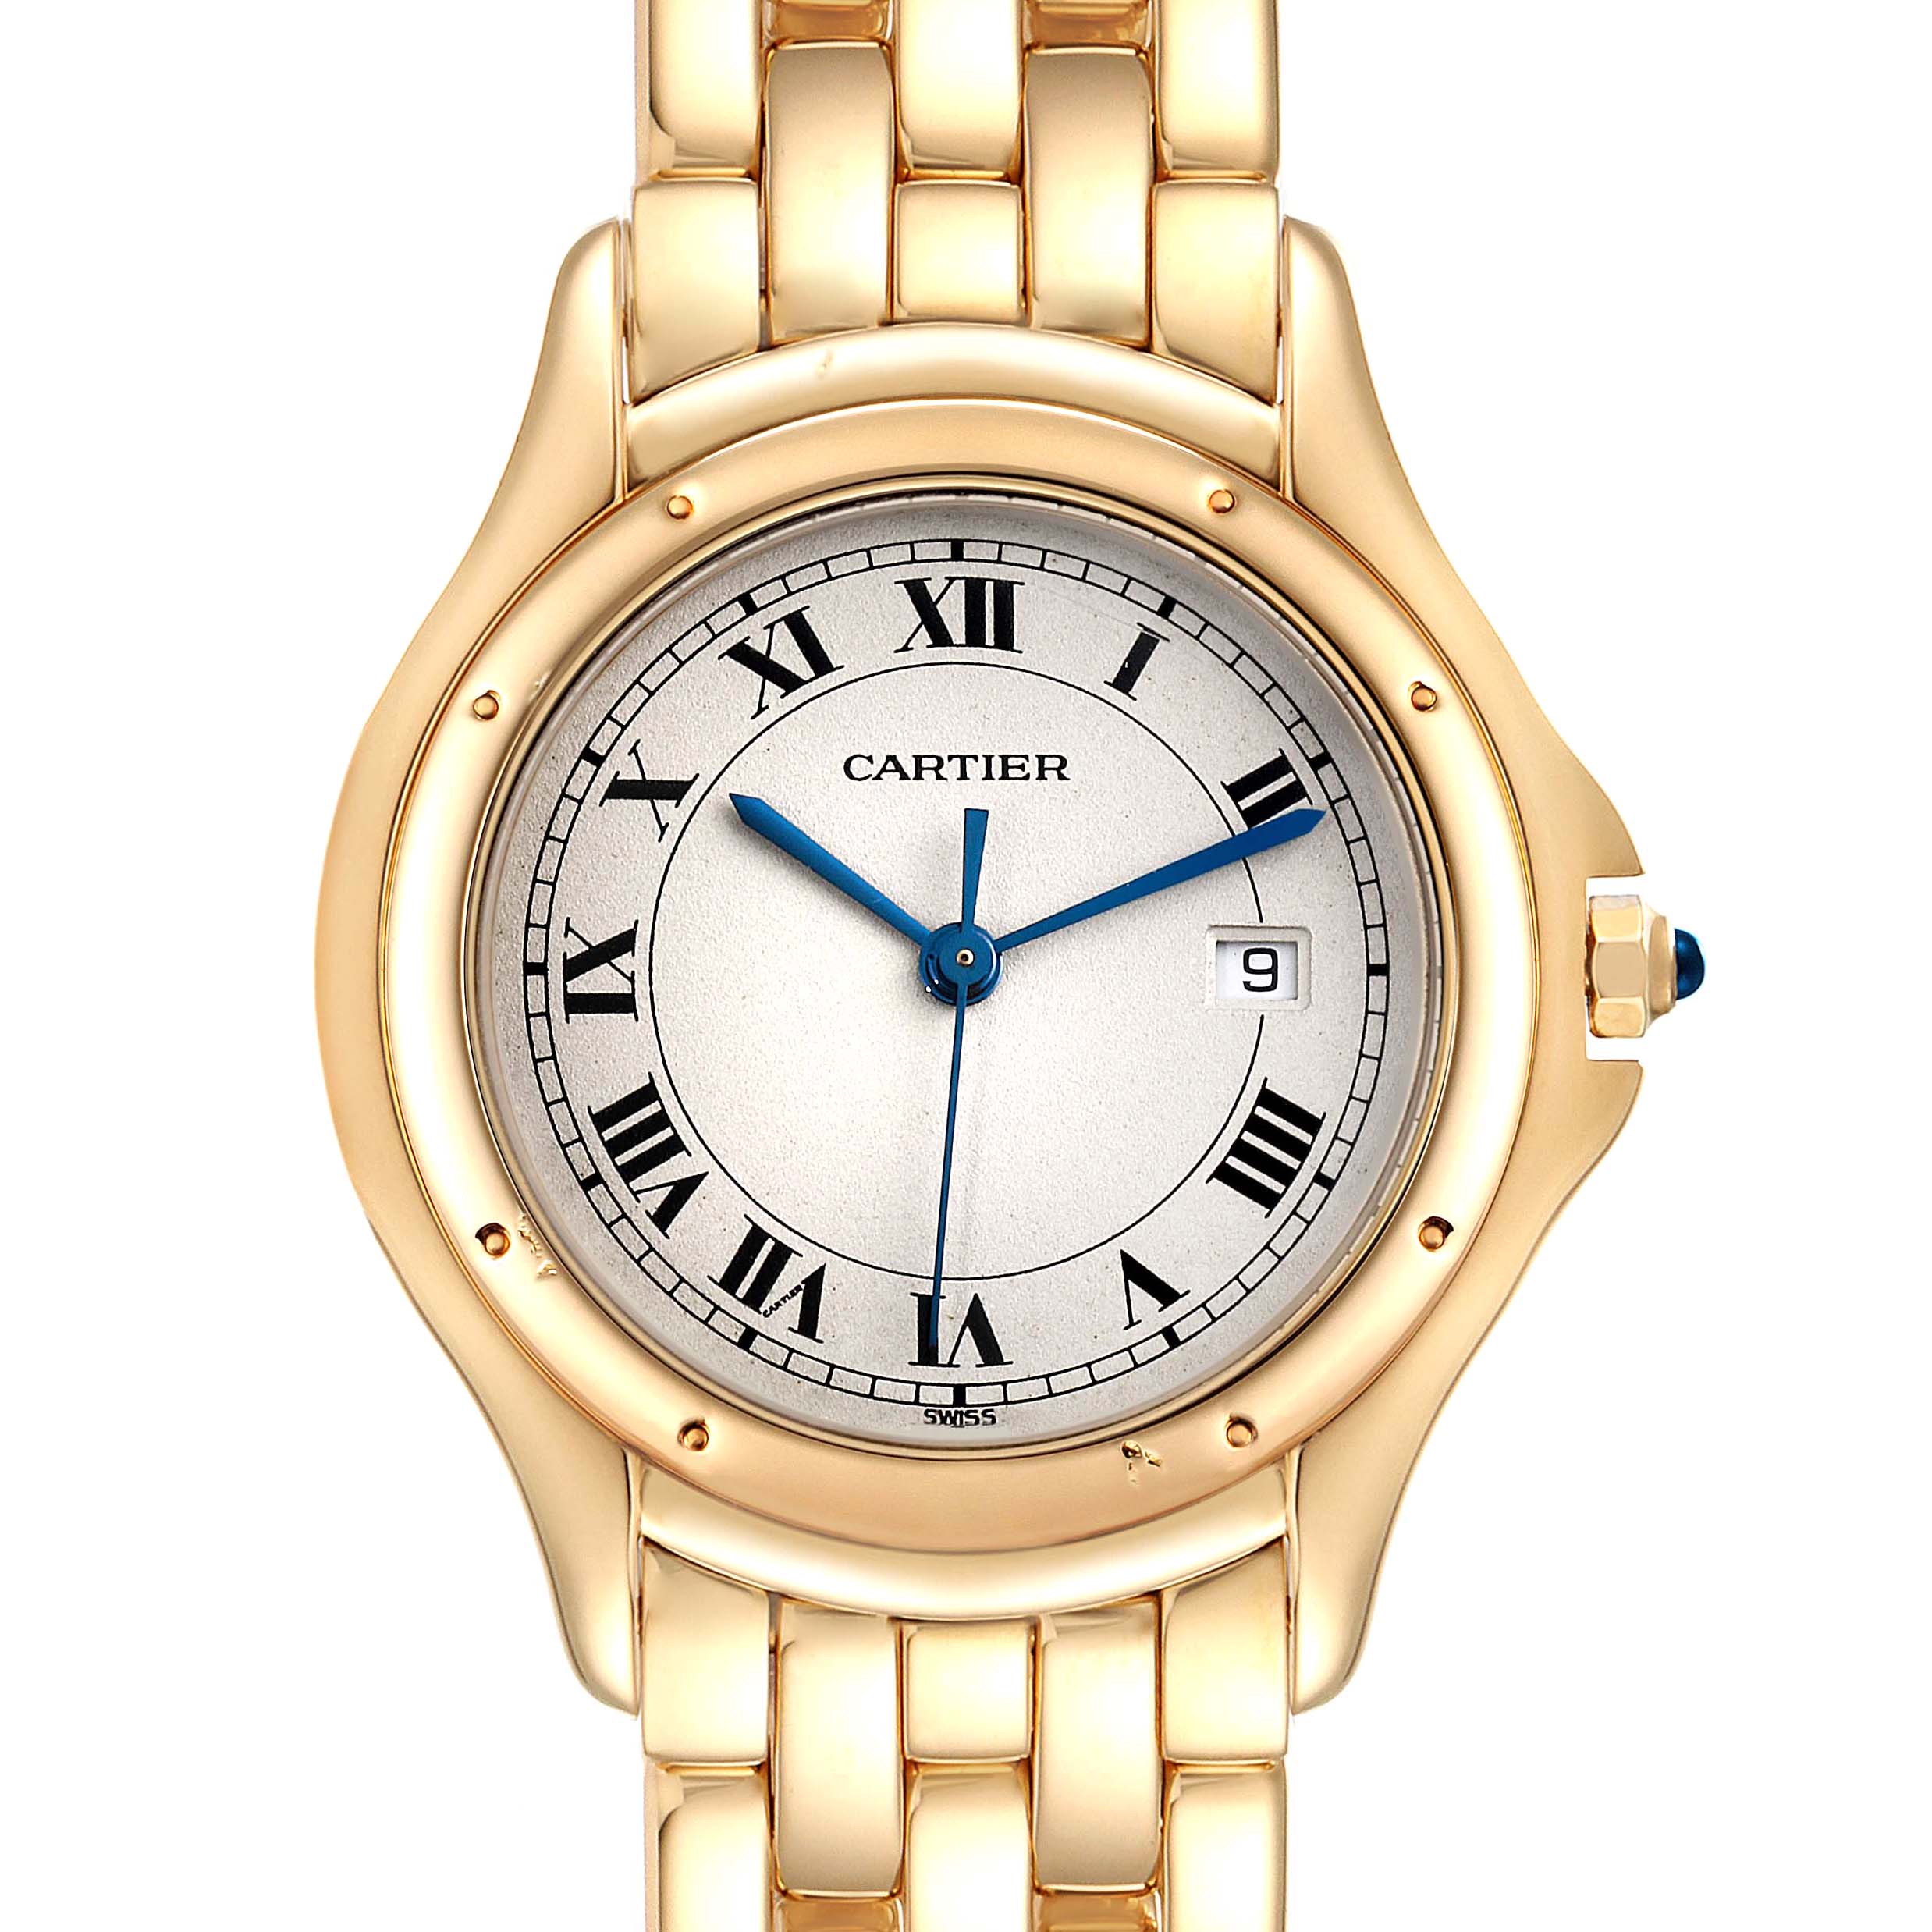 Cartier Cougar 18K Yellow Gold Silver Dial Ladies Watch 887904